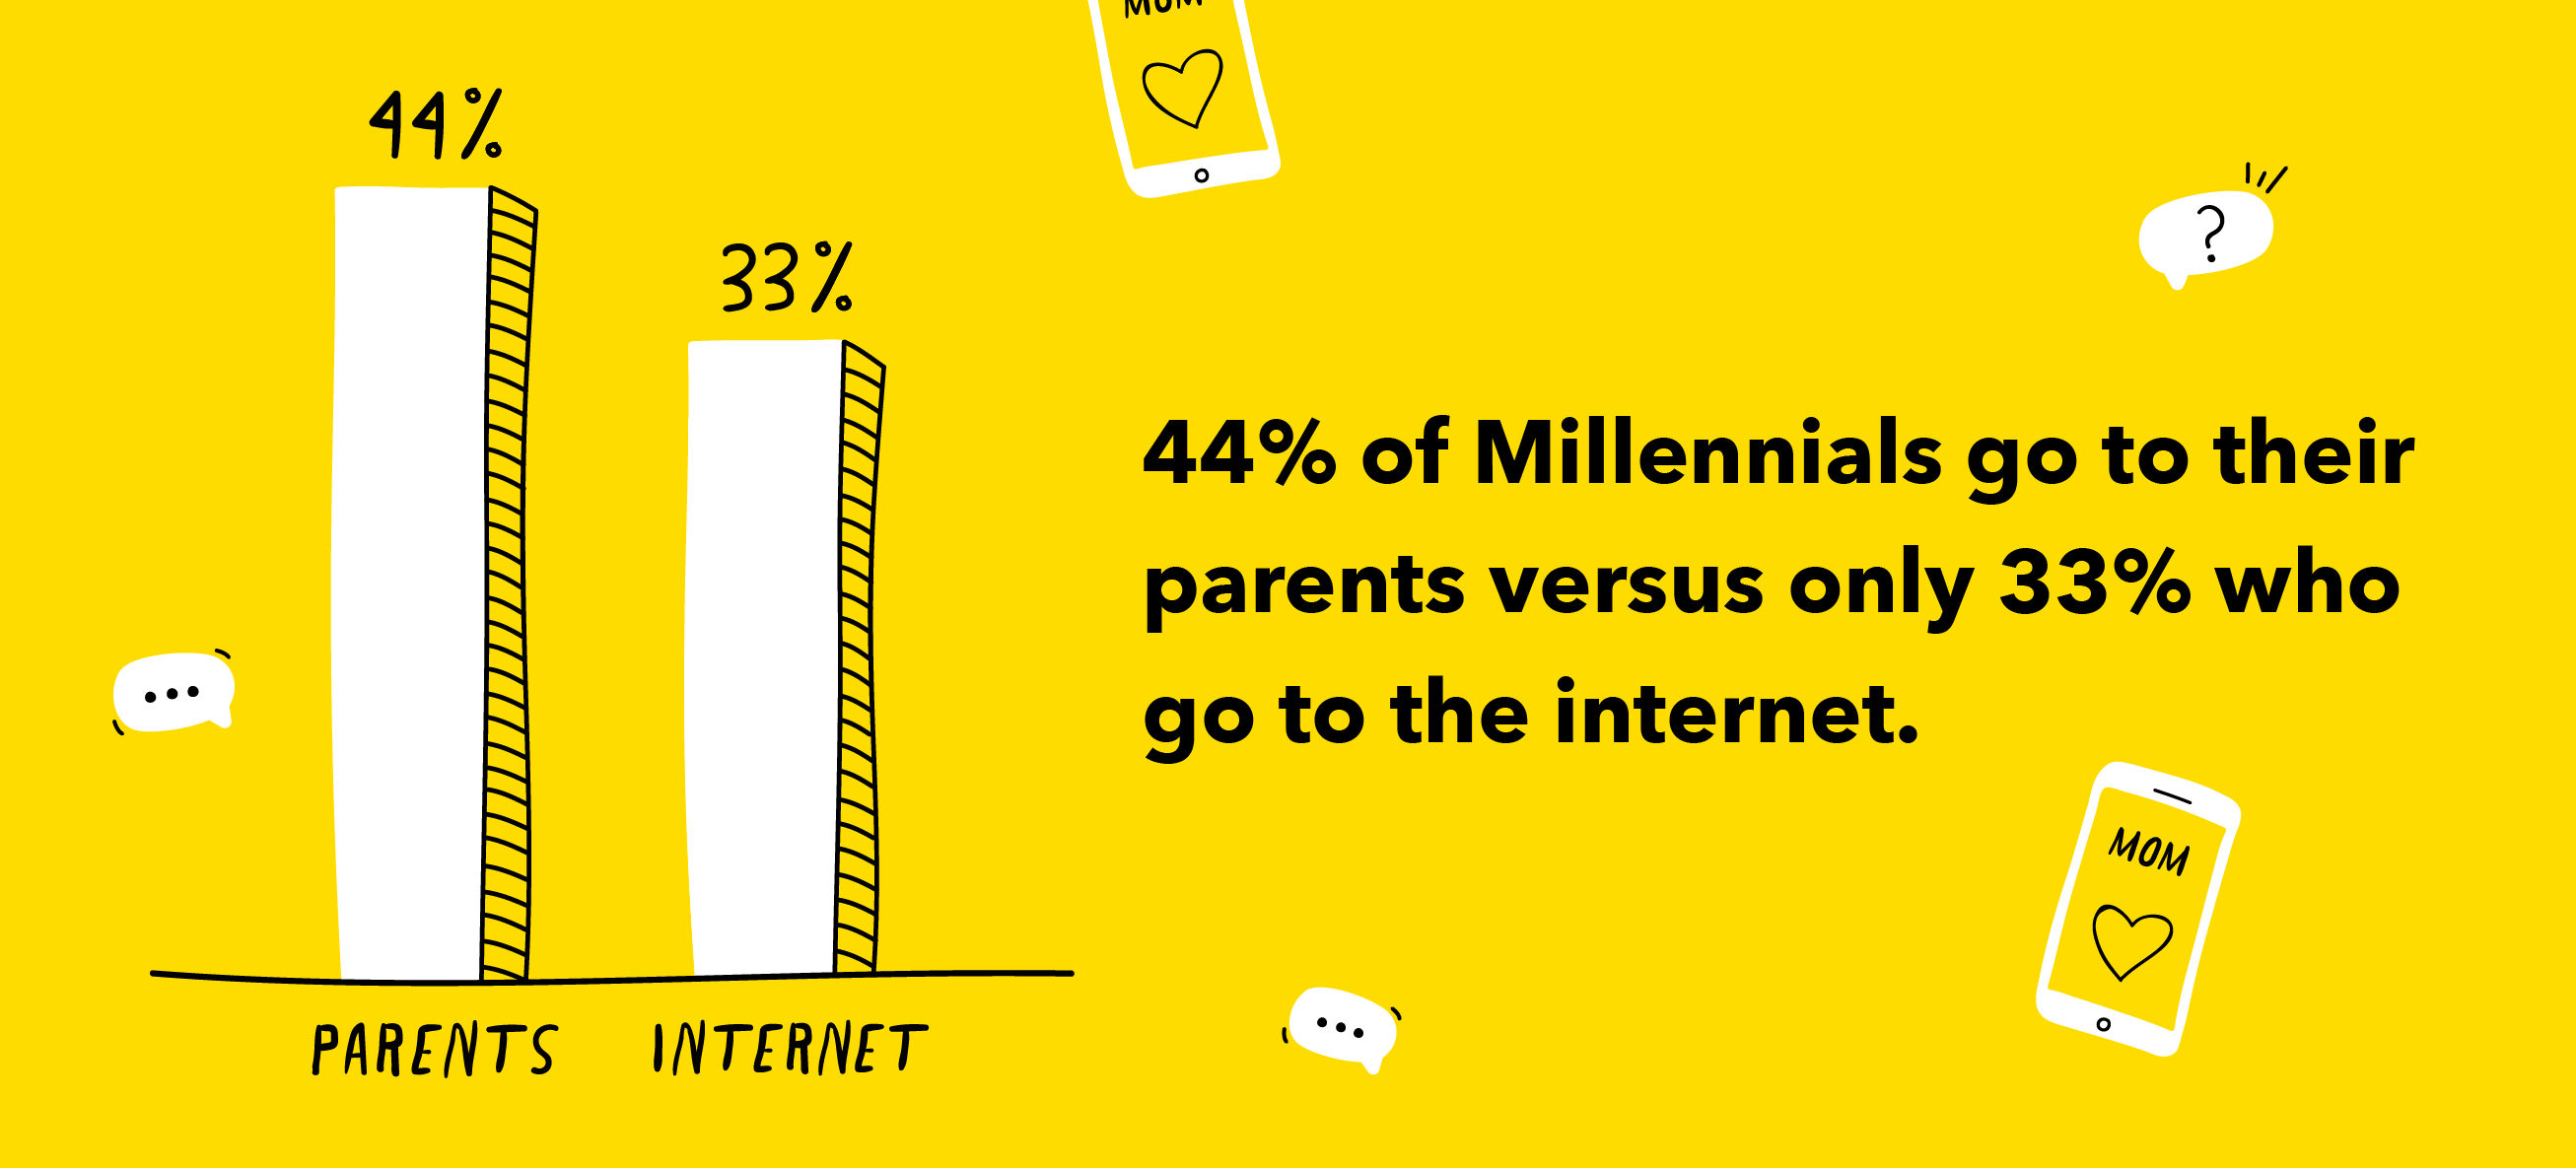 illustrated graphic showing more people trust their parents for financial advice than the internet